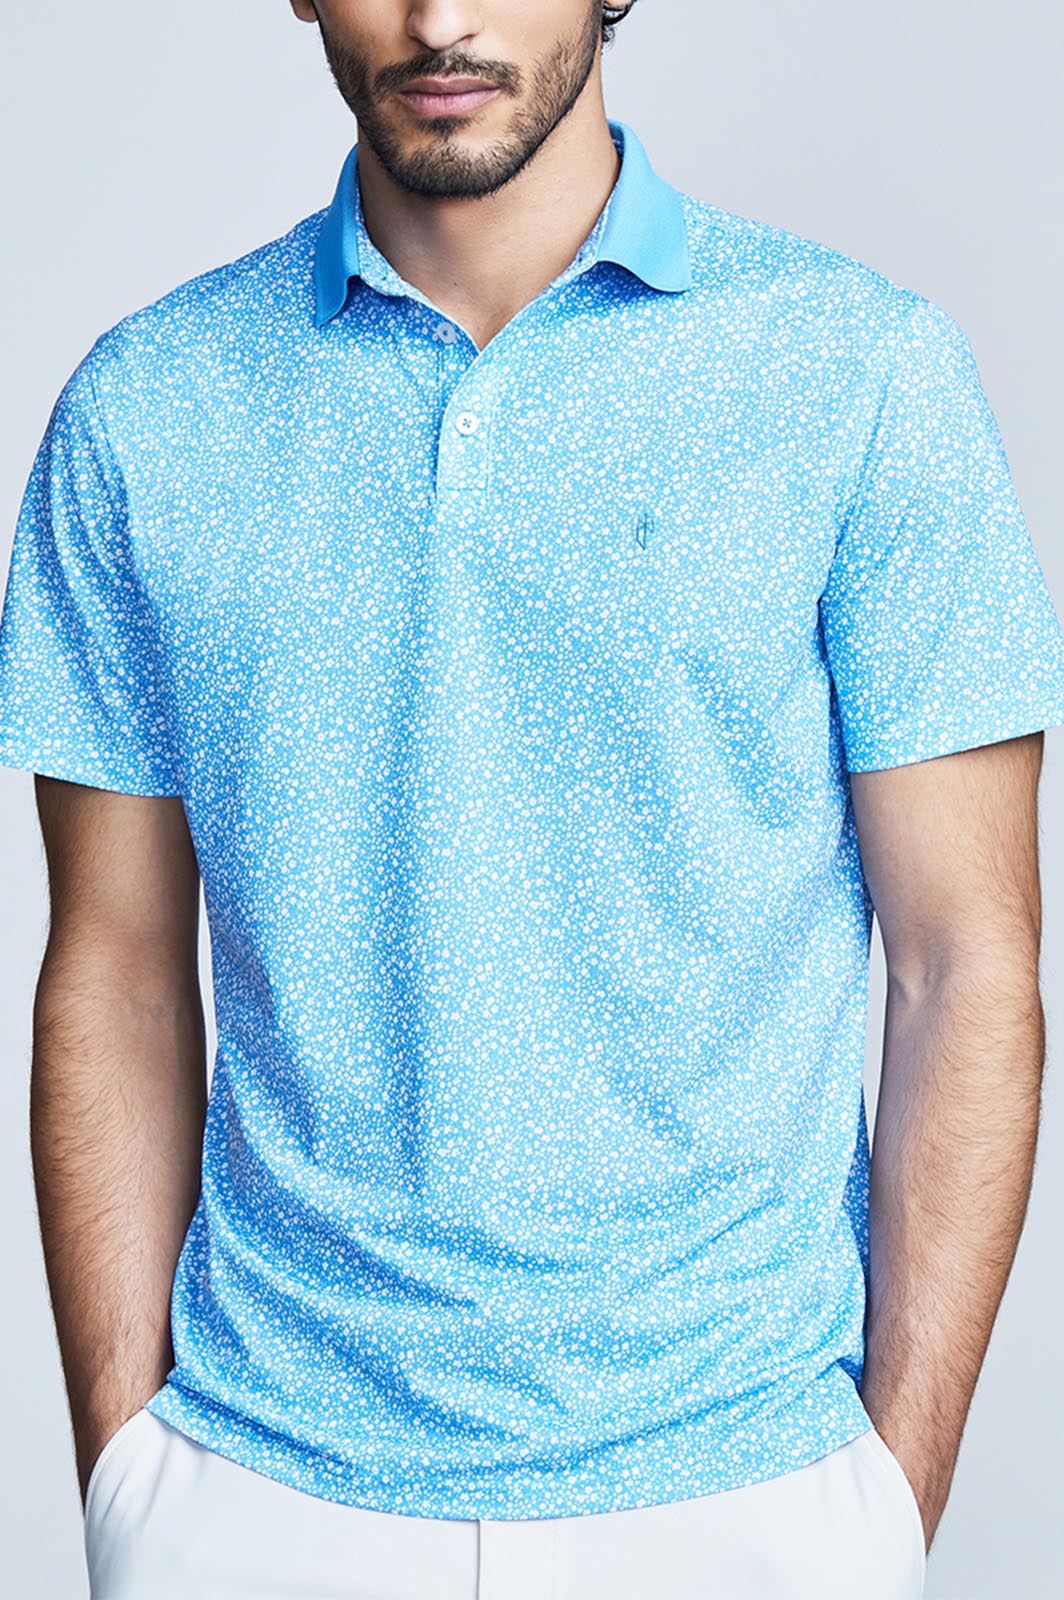 Opwekking lezing metgezel Blue Floral All Over Print Men's Polo | State of Matter Apparel - State of  Matter Apparel